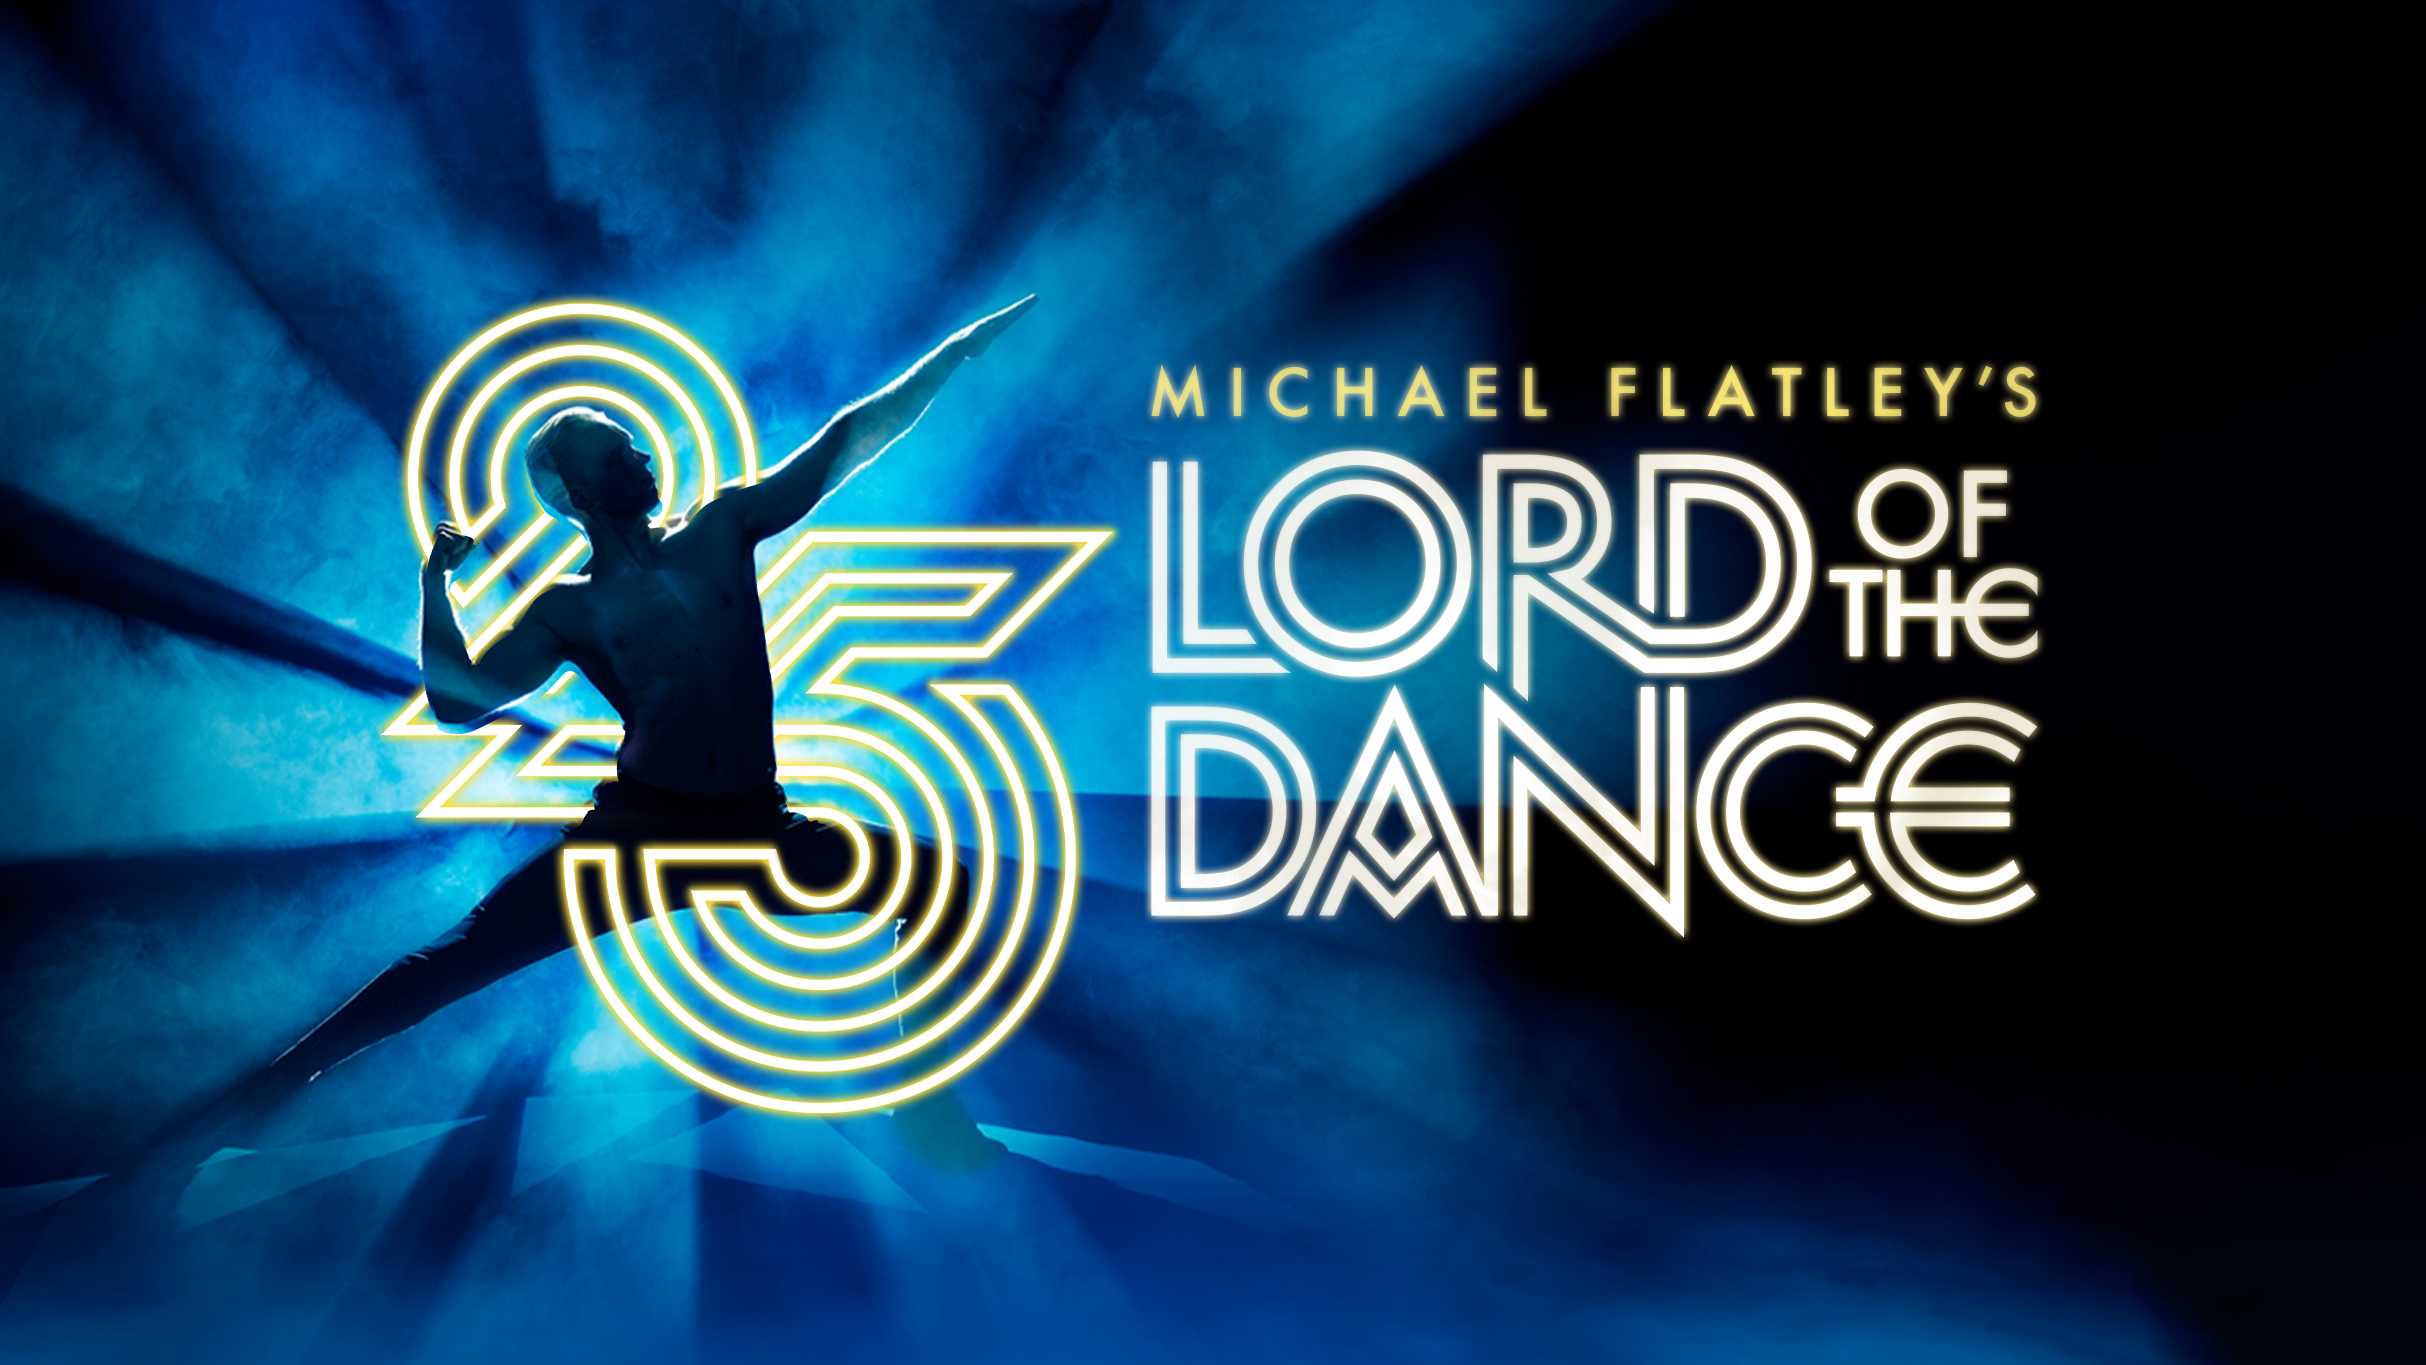 Micheal Flatley's Lord of The Dance - 25 Years of Standing Ovations